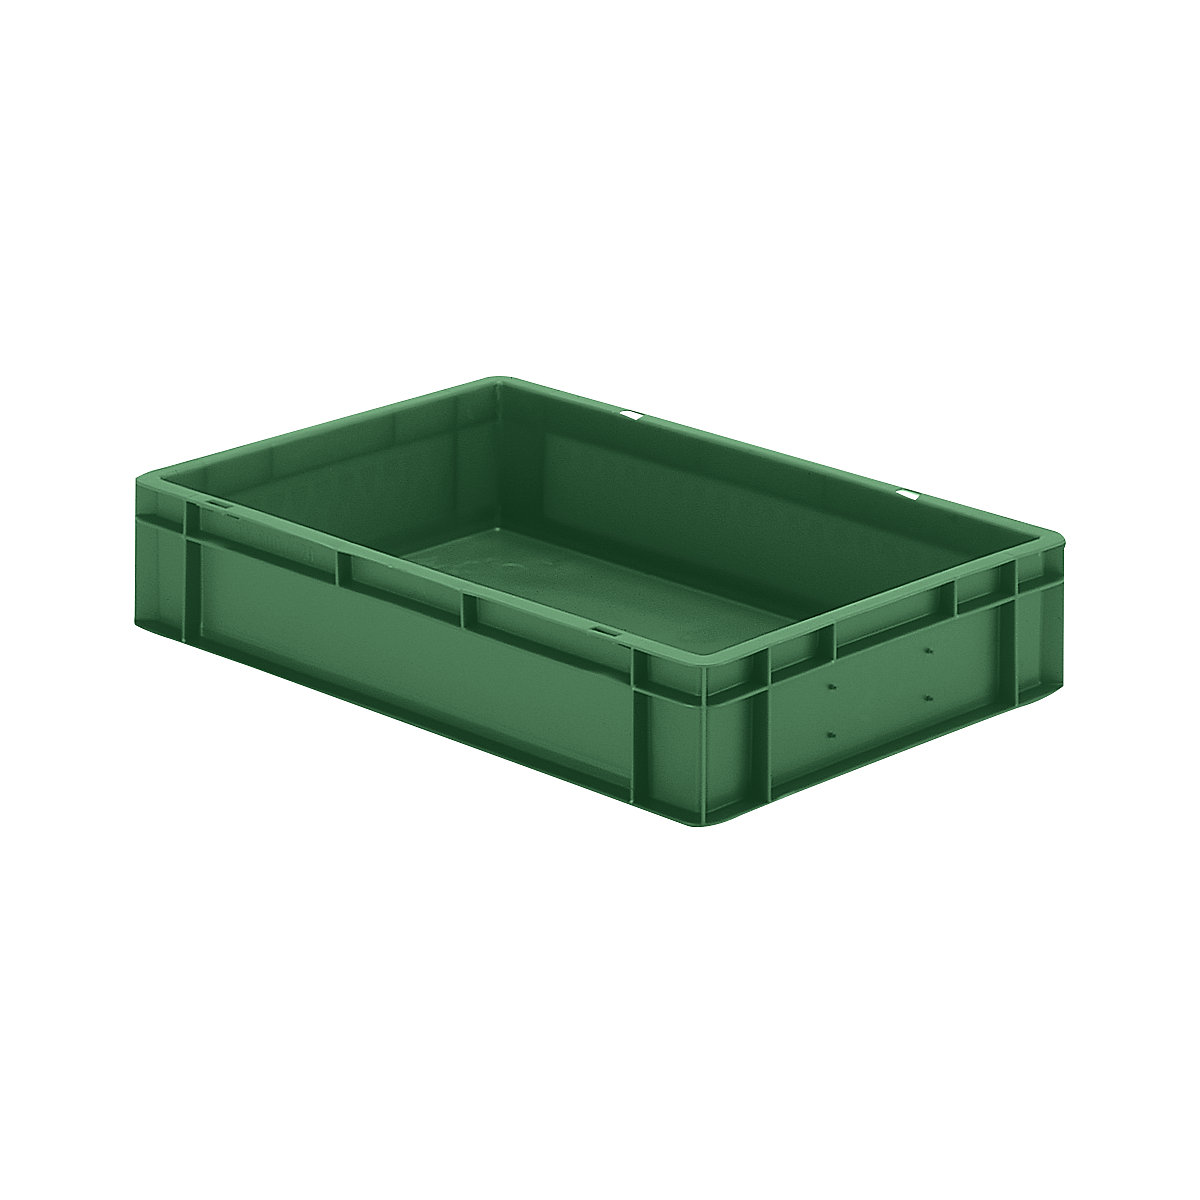 Euro stacking container, closed walls and base, LxWxH 600 x 400 x 120 mm, green, pack of 5